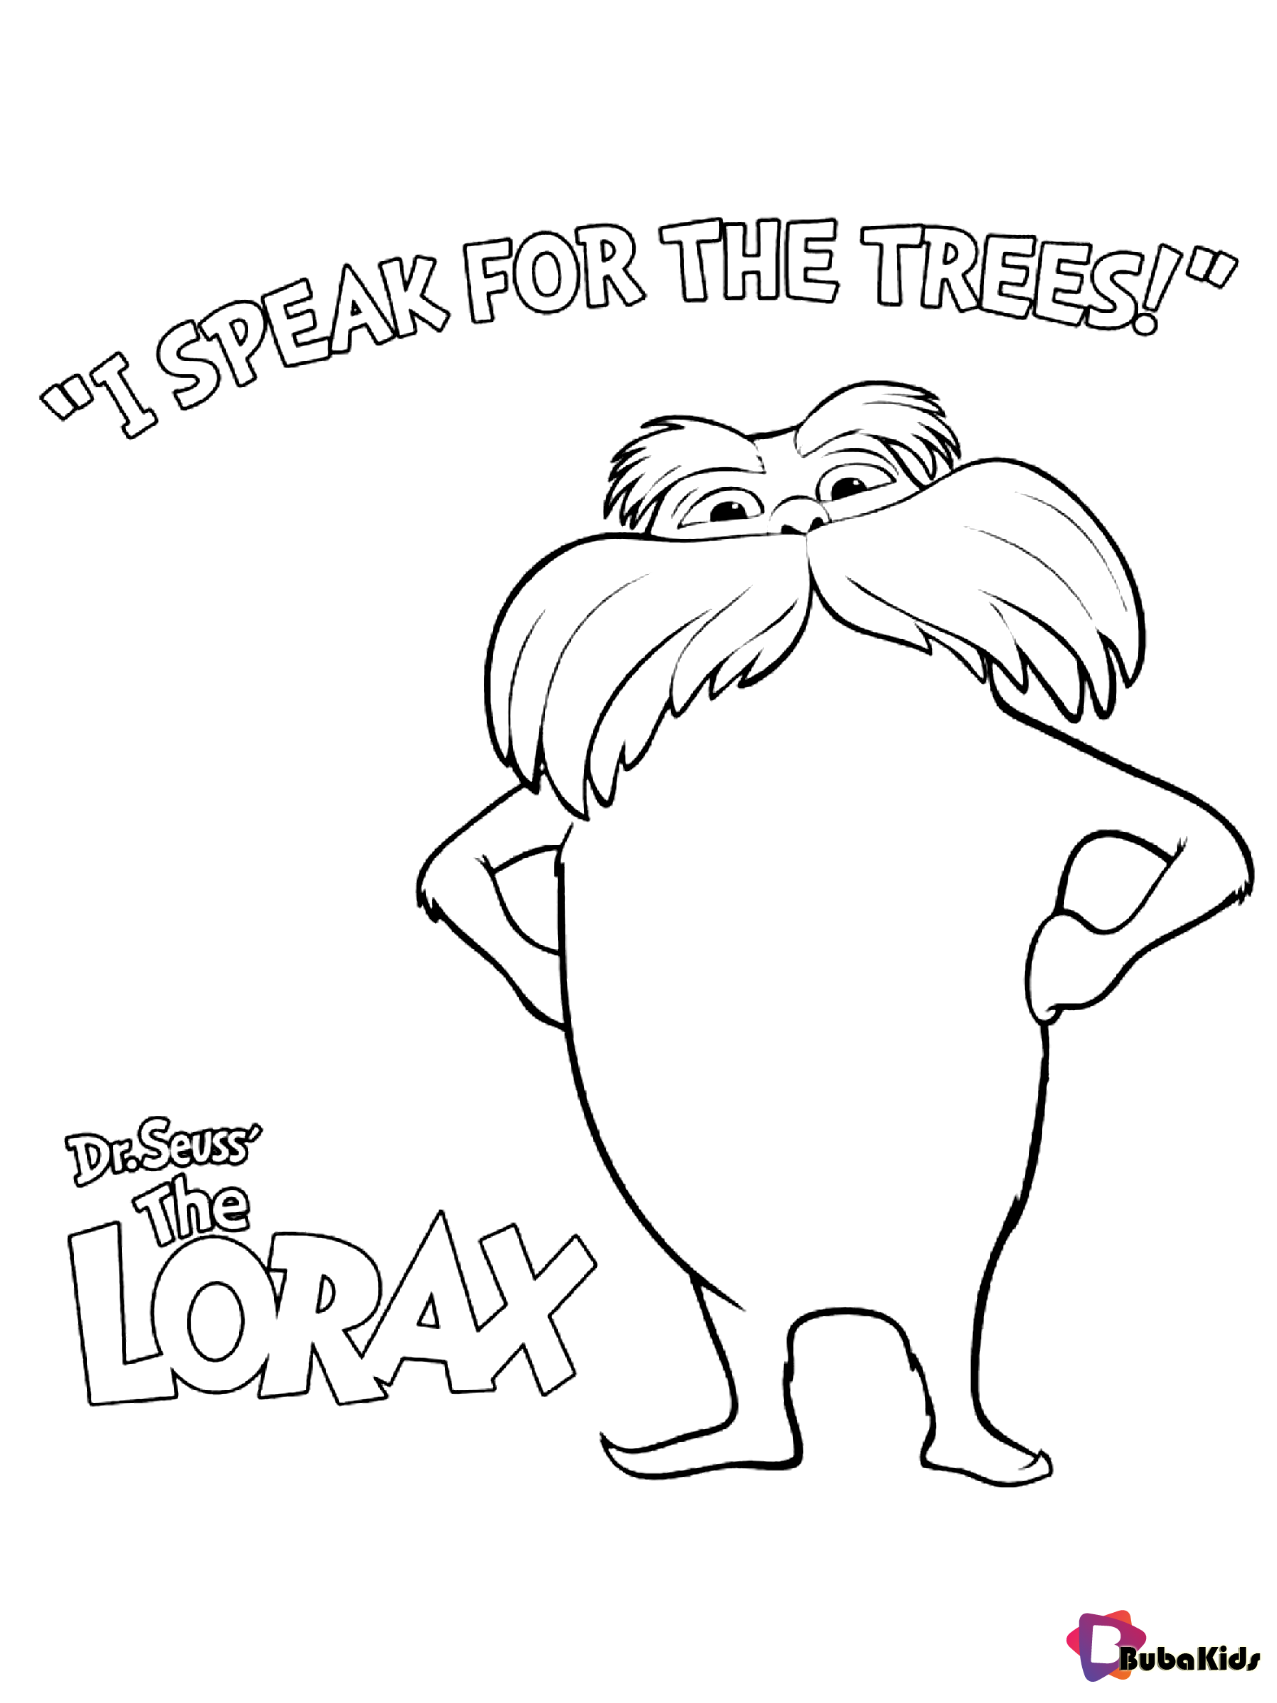 Dr seuss The Lorax I speak for the trees coloring pages Wallpaper